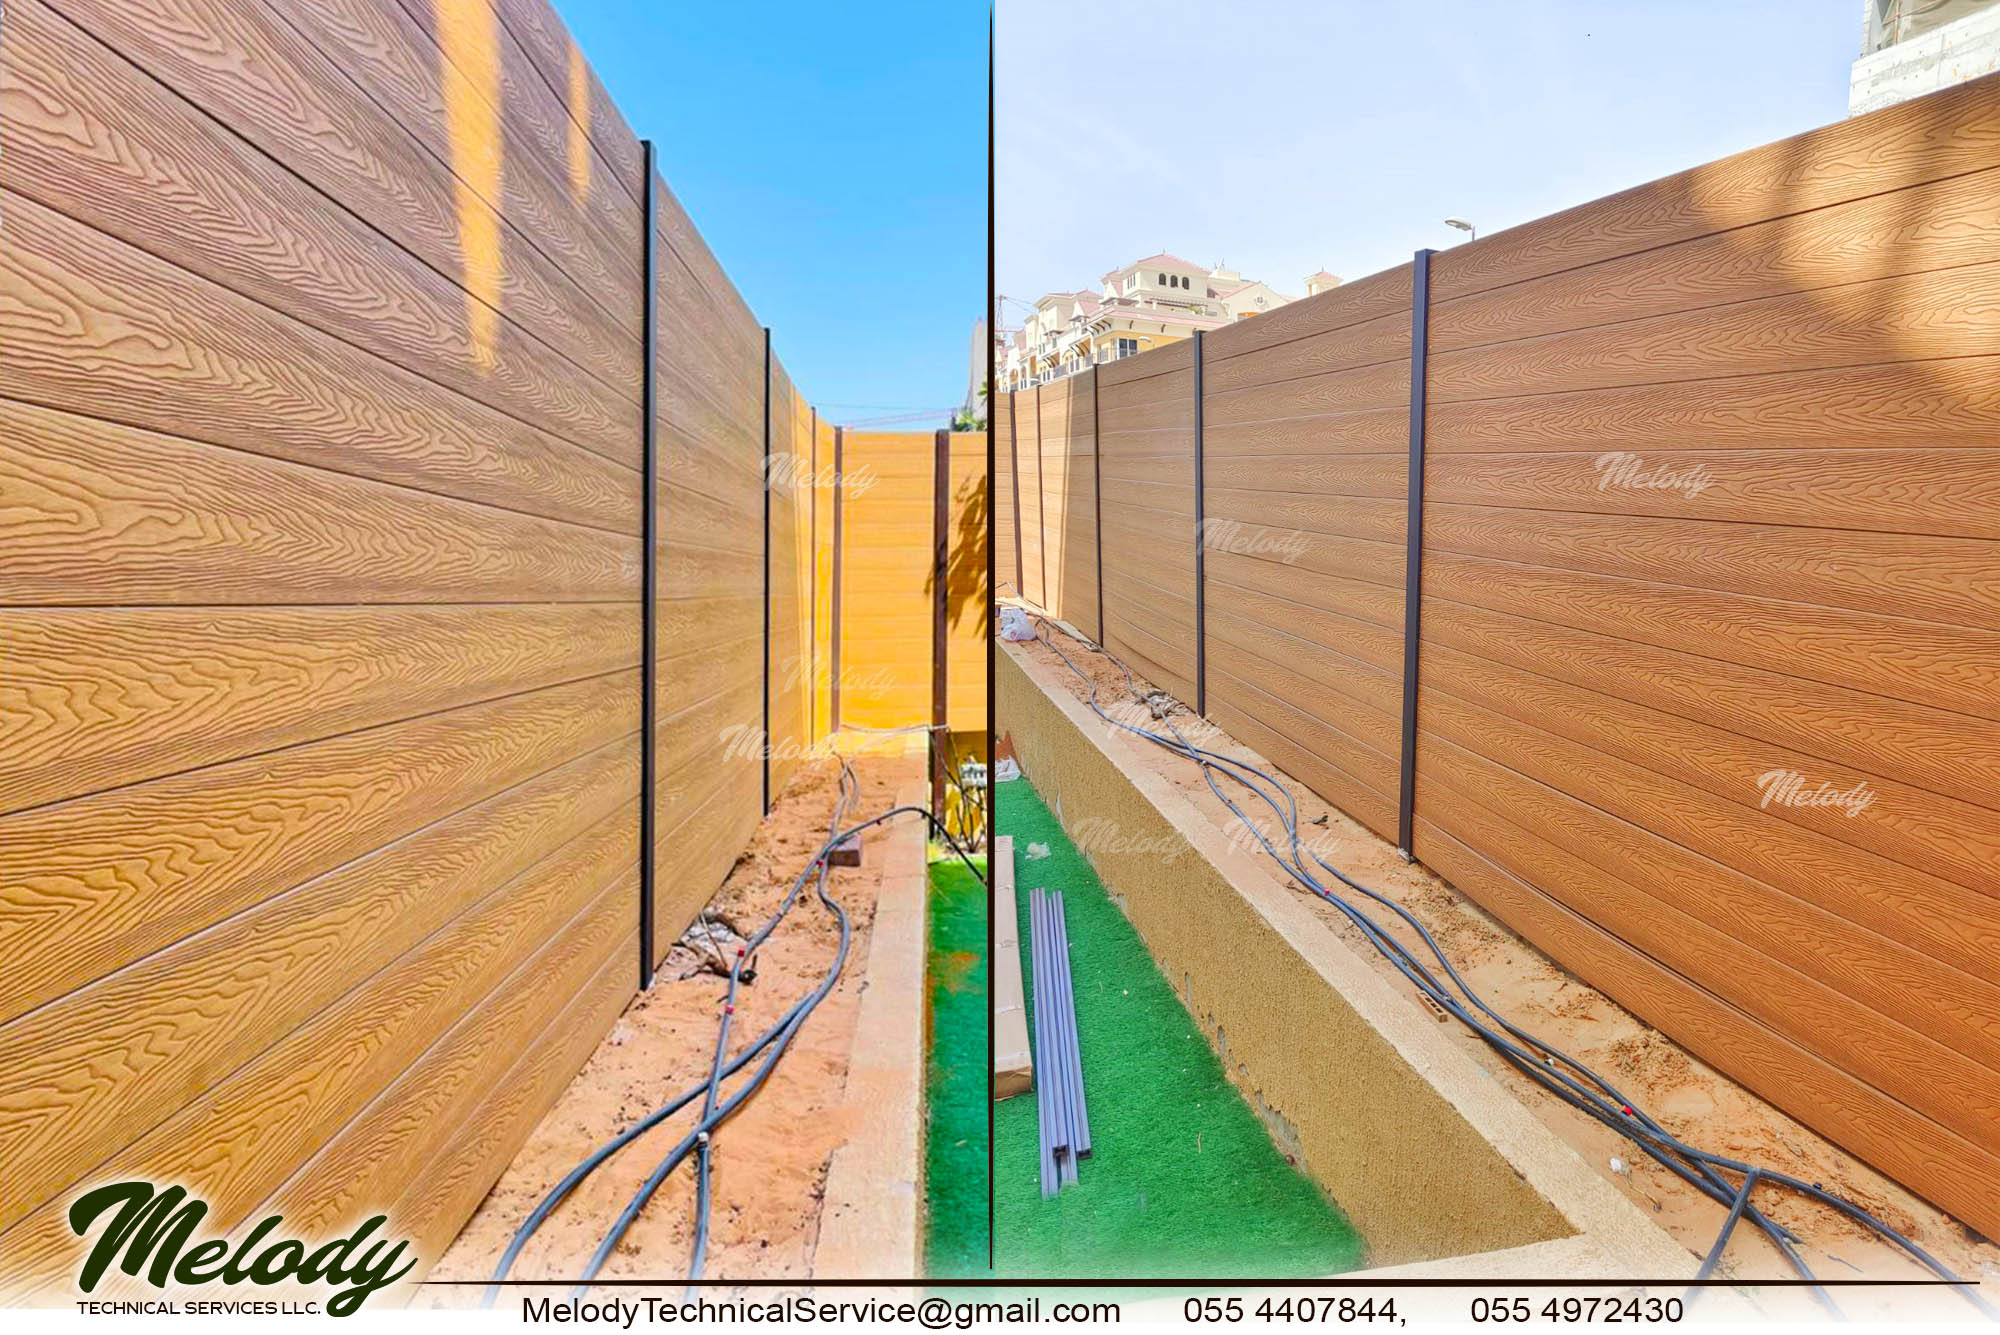 WPC Fence Manufacturer, Buy WPC Fence in Dubai (4).jpg